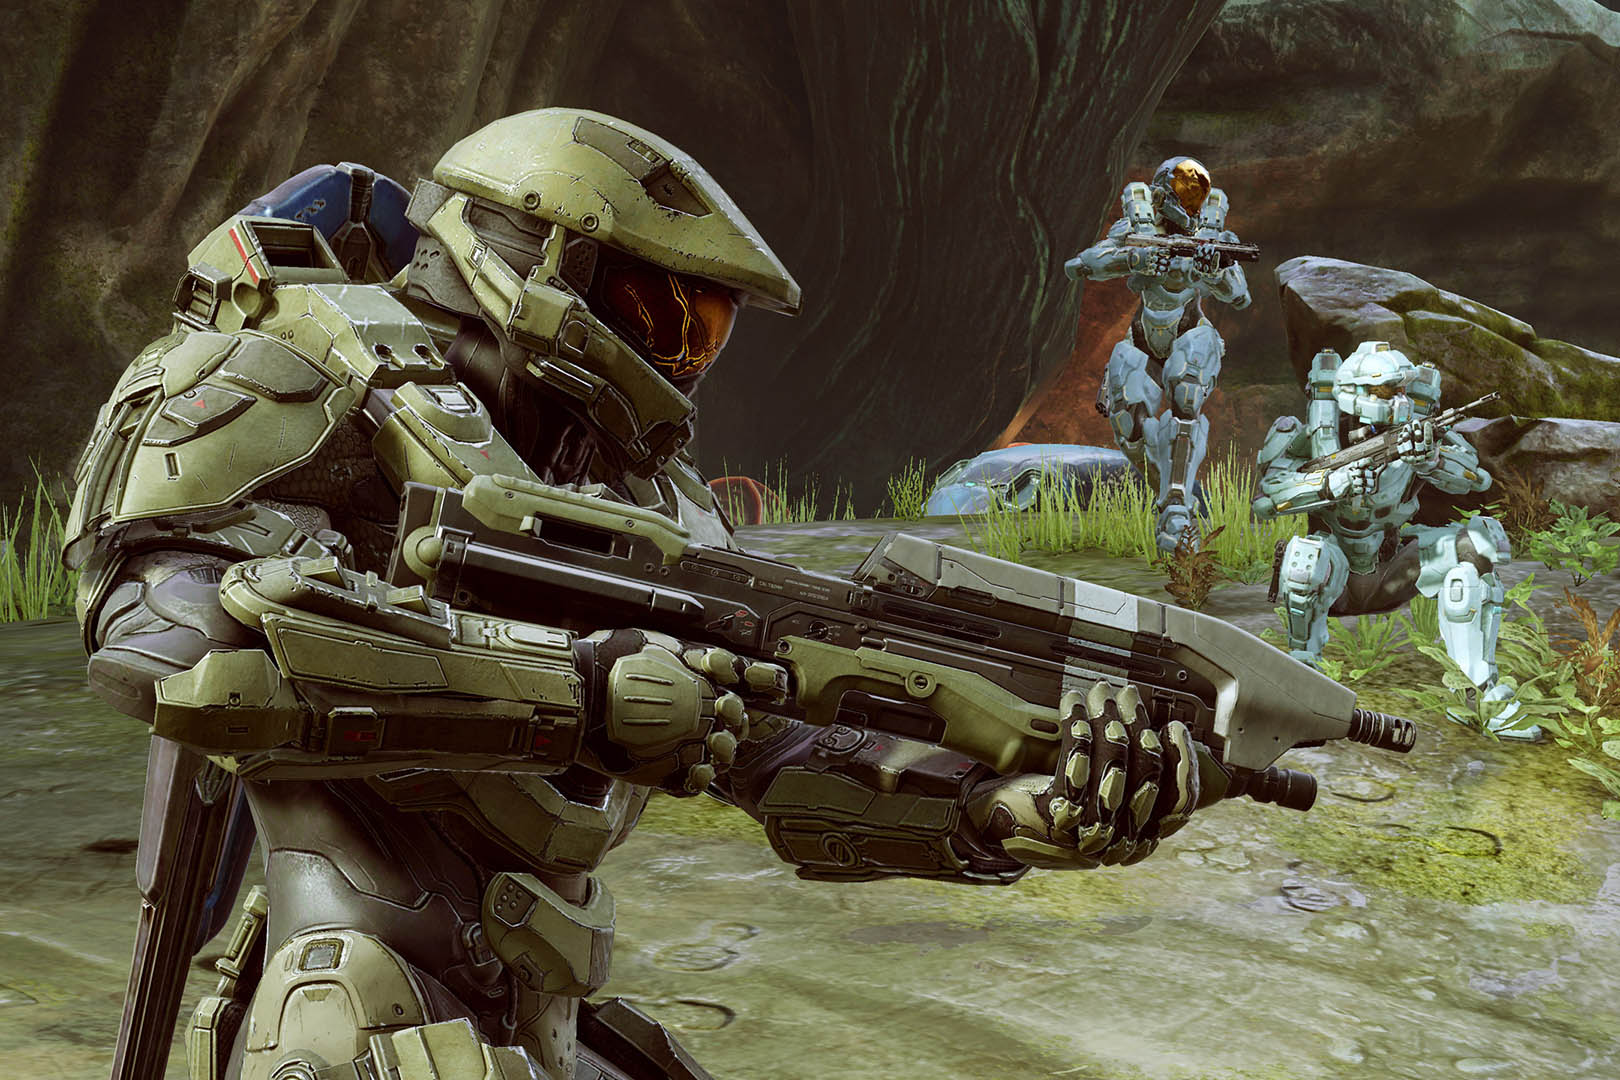 Master Chief John-117 is Back in First Teaser for 'Halo' Series Season 2